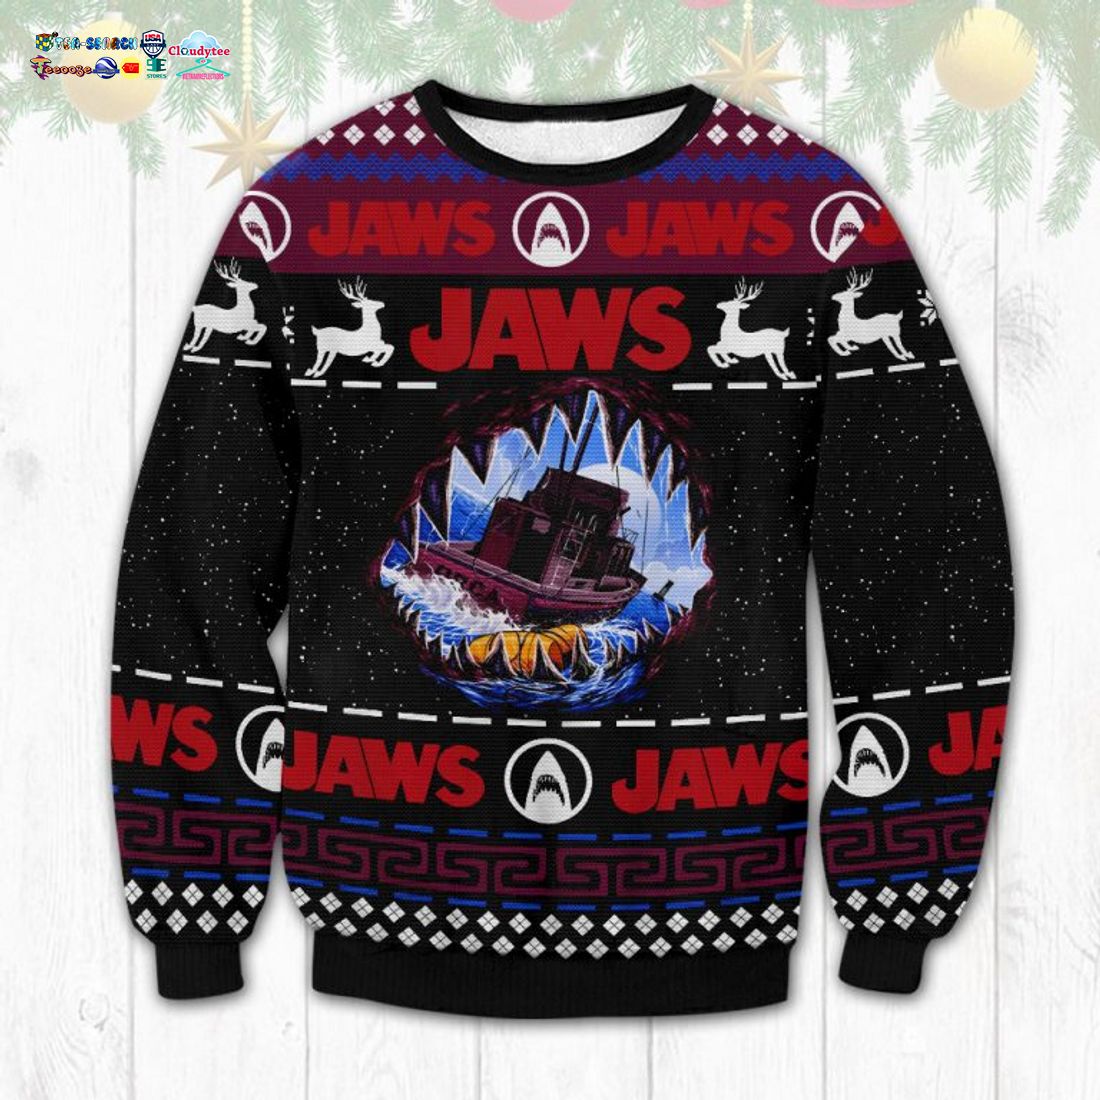 Jaws Ver 2 Ugly Christmas Sweater